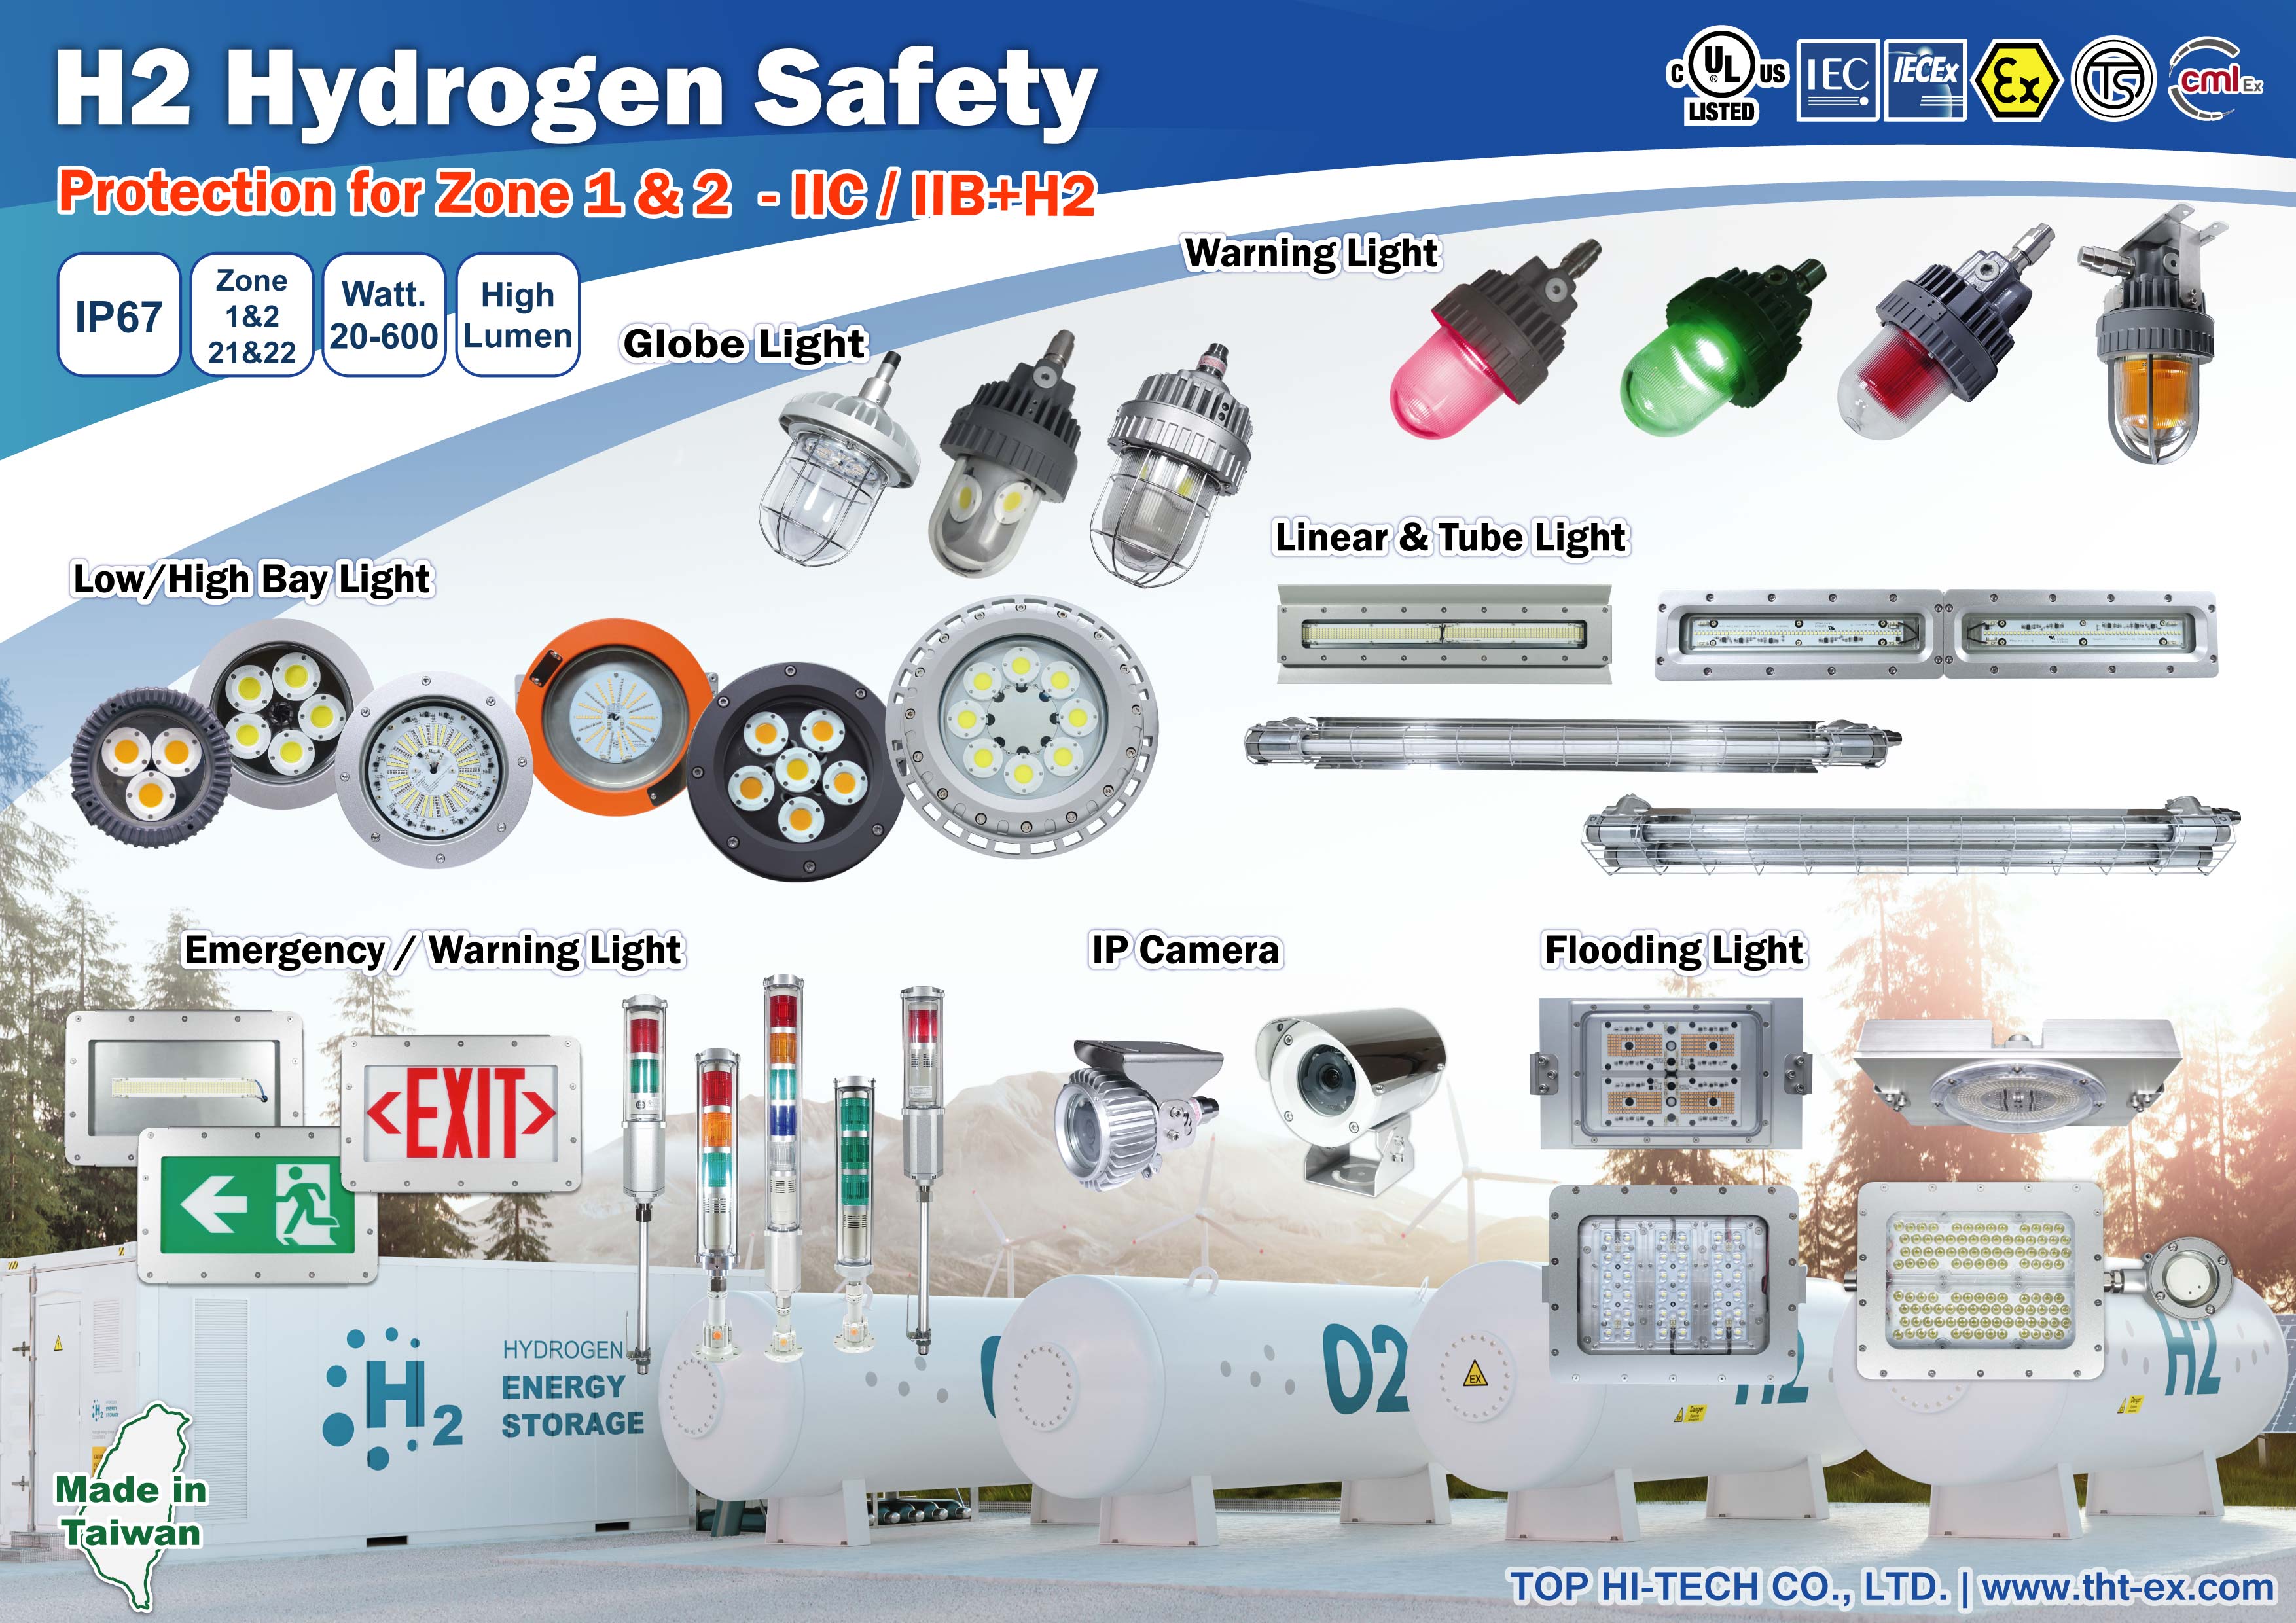 Explosion Proof Lighting Solution for Hydrogen Environment to Achieve Net-Zero Emissions Goal